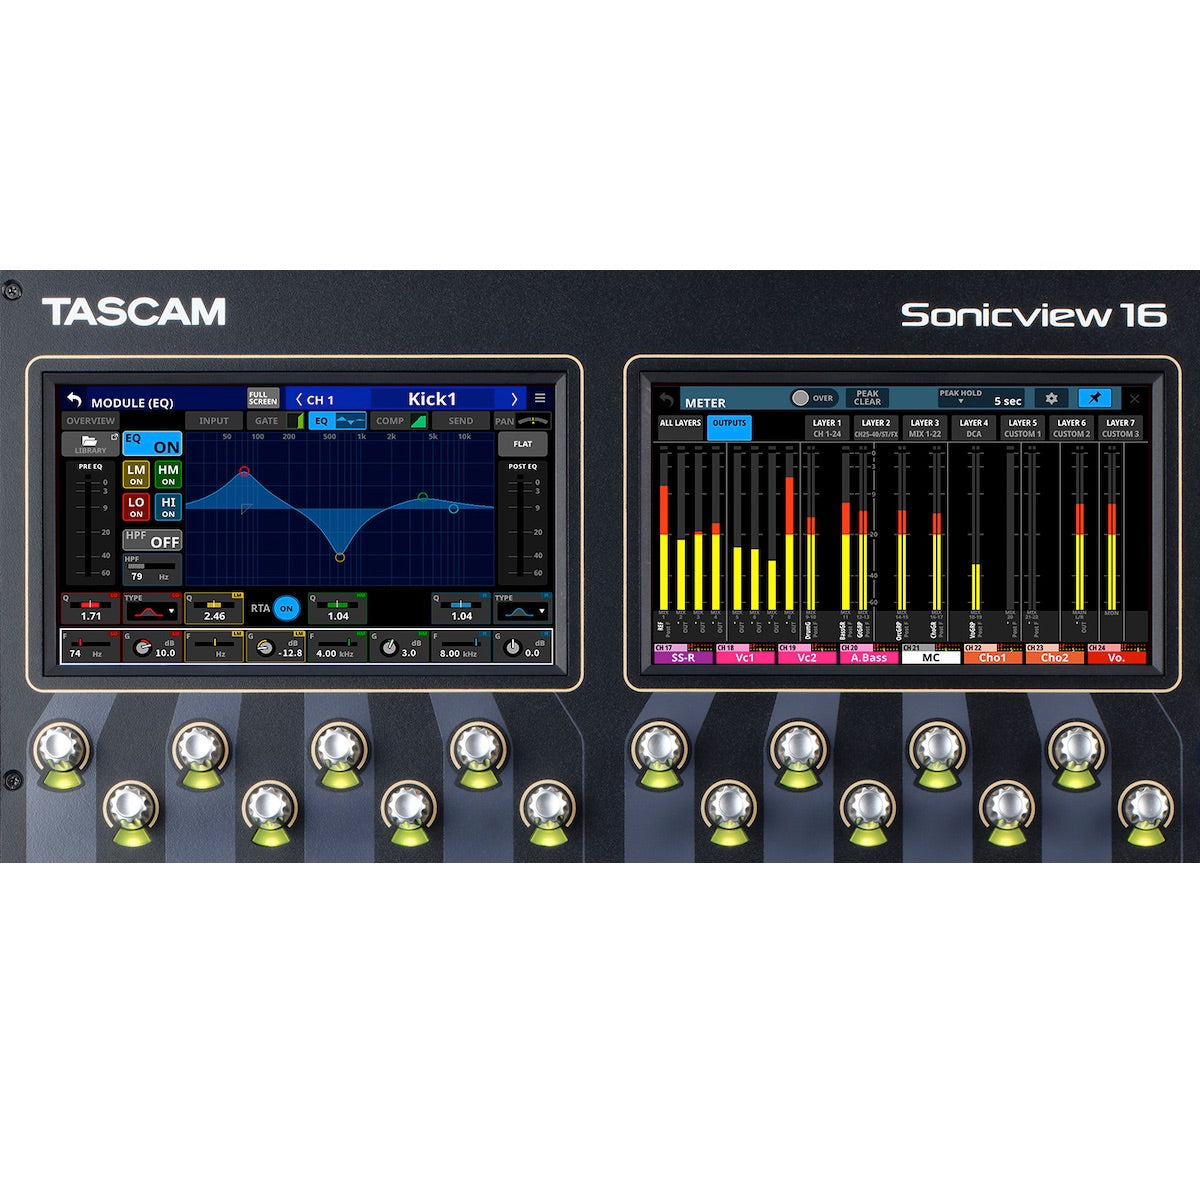 TASCAM Sonicview 16XP - 16-input Digital Recording and Mixing Console, individual view